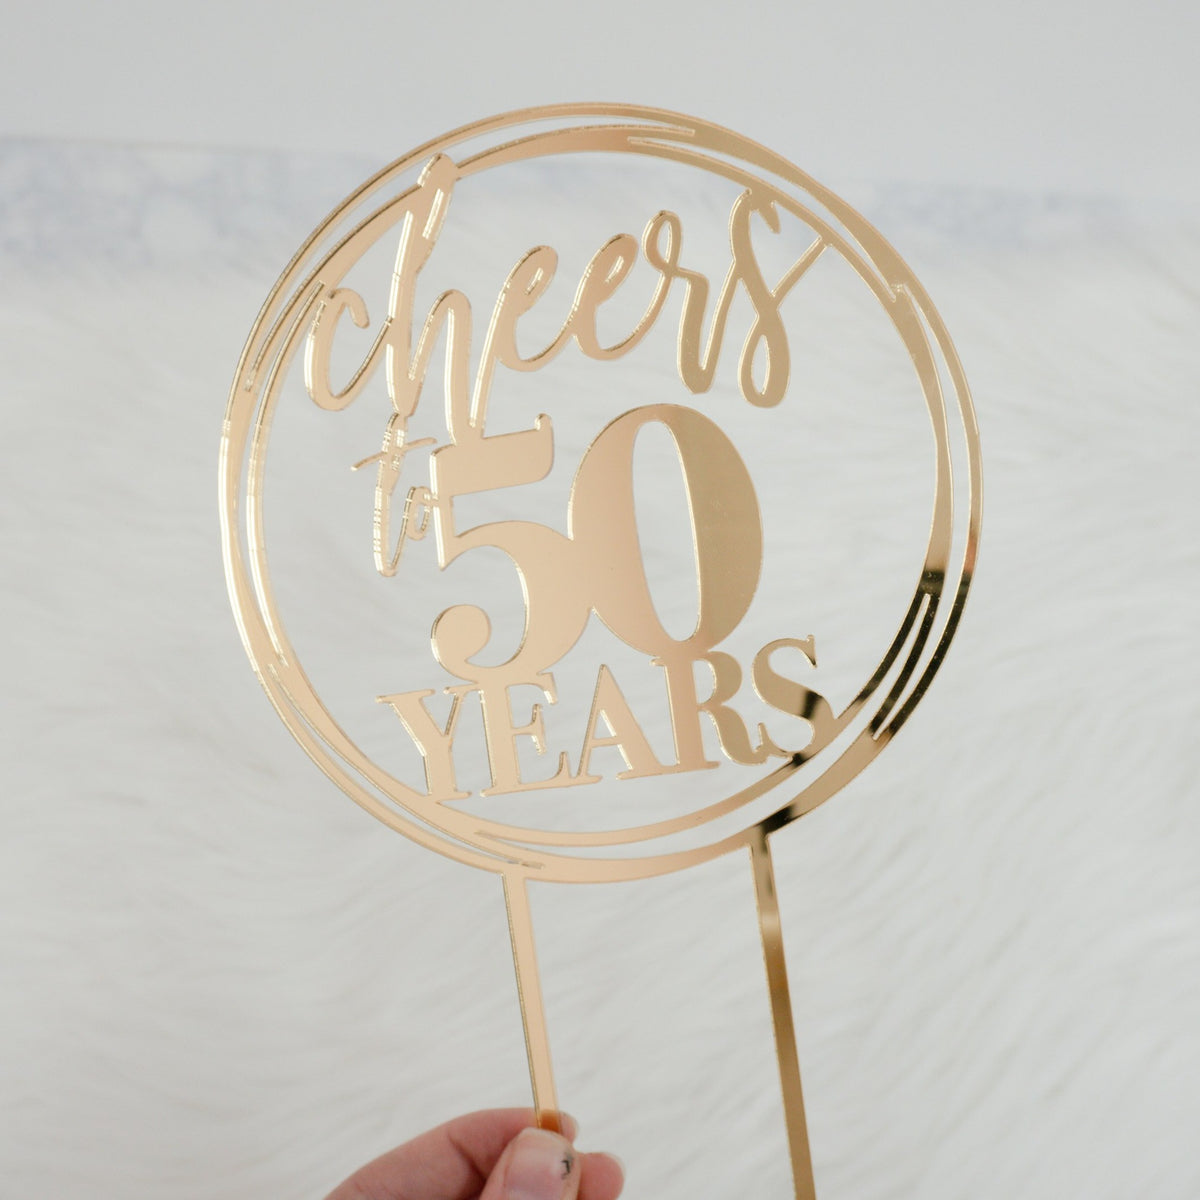 Handmade 50th Fifty Birthday Cake Topper Decoration - Made in US